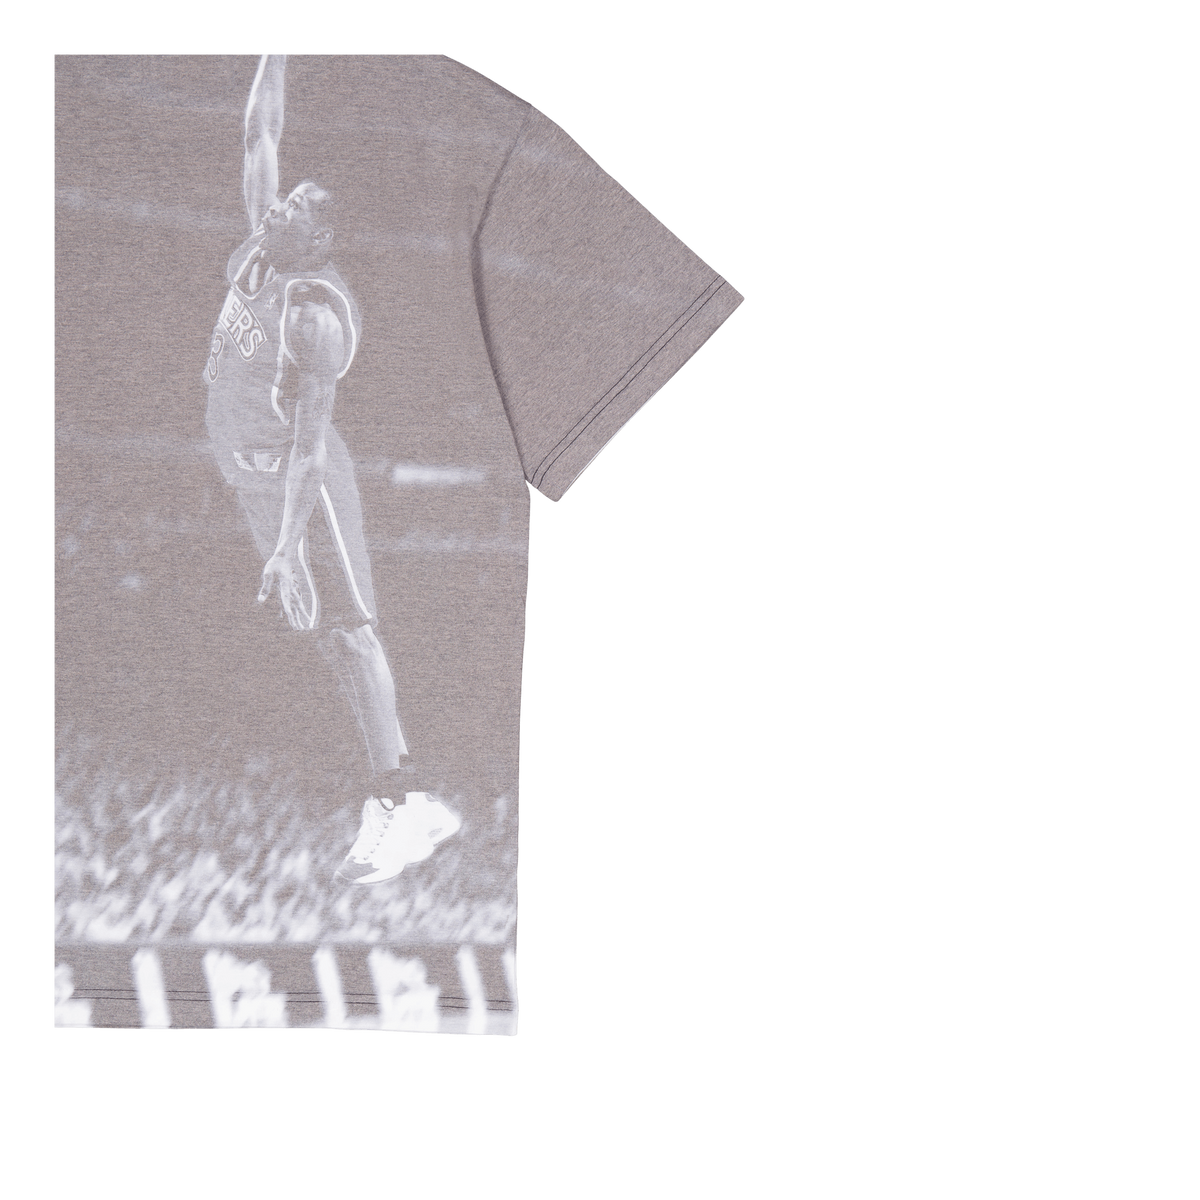 Above The Rim Sublimated S/s T White